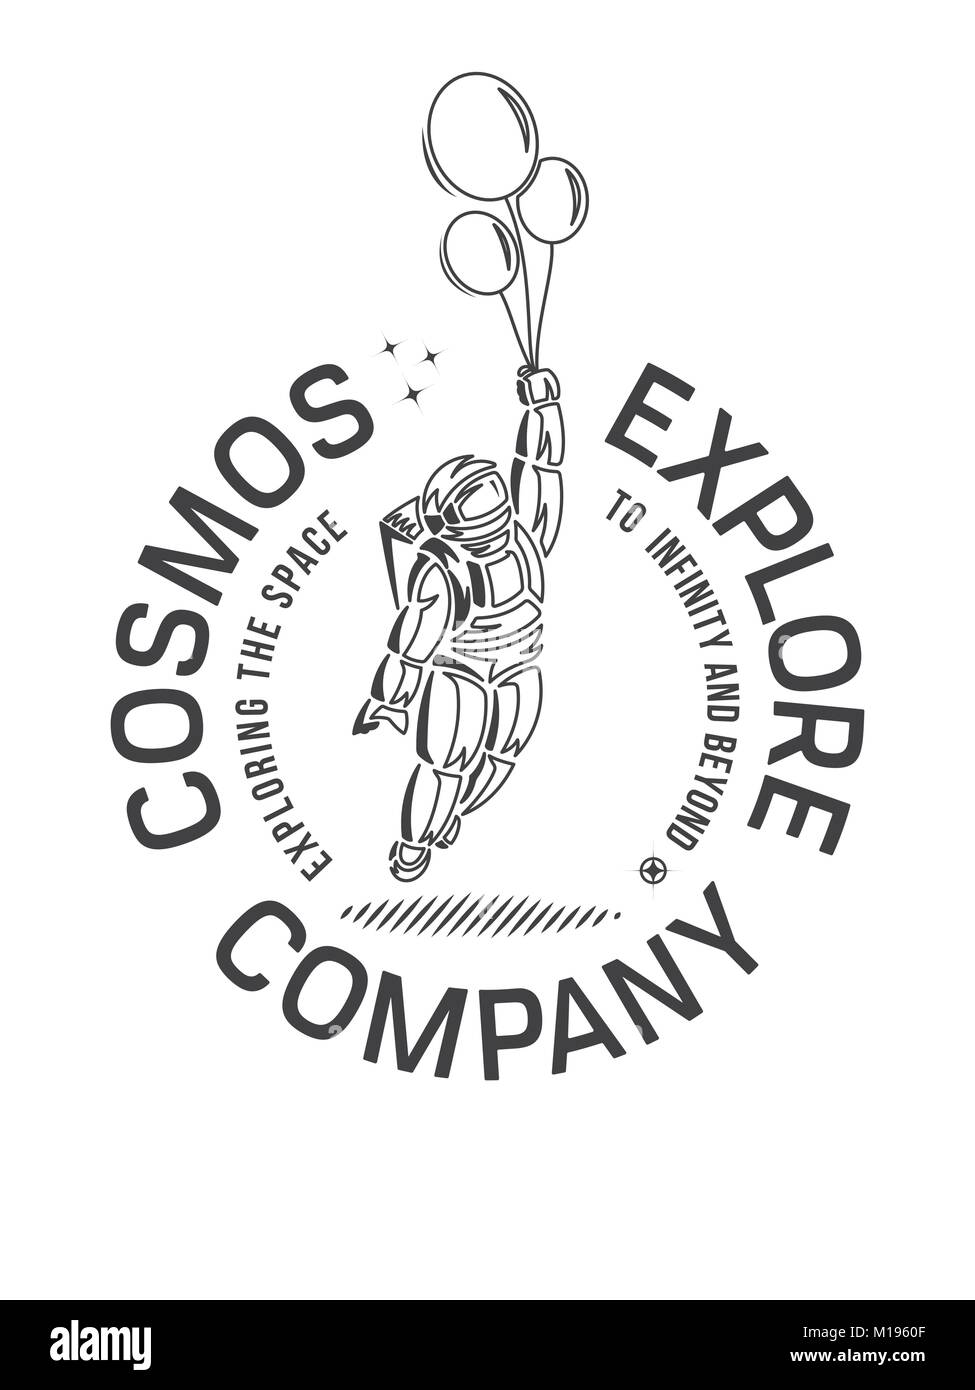 Space cosmos exploration company vector illustration black on white depicting a spaceman with balloons Stock Vector